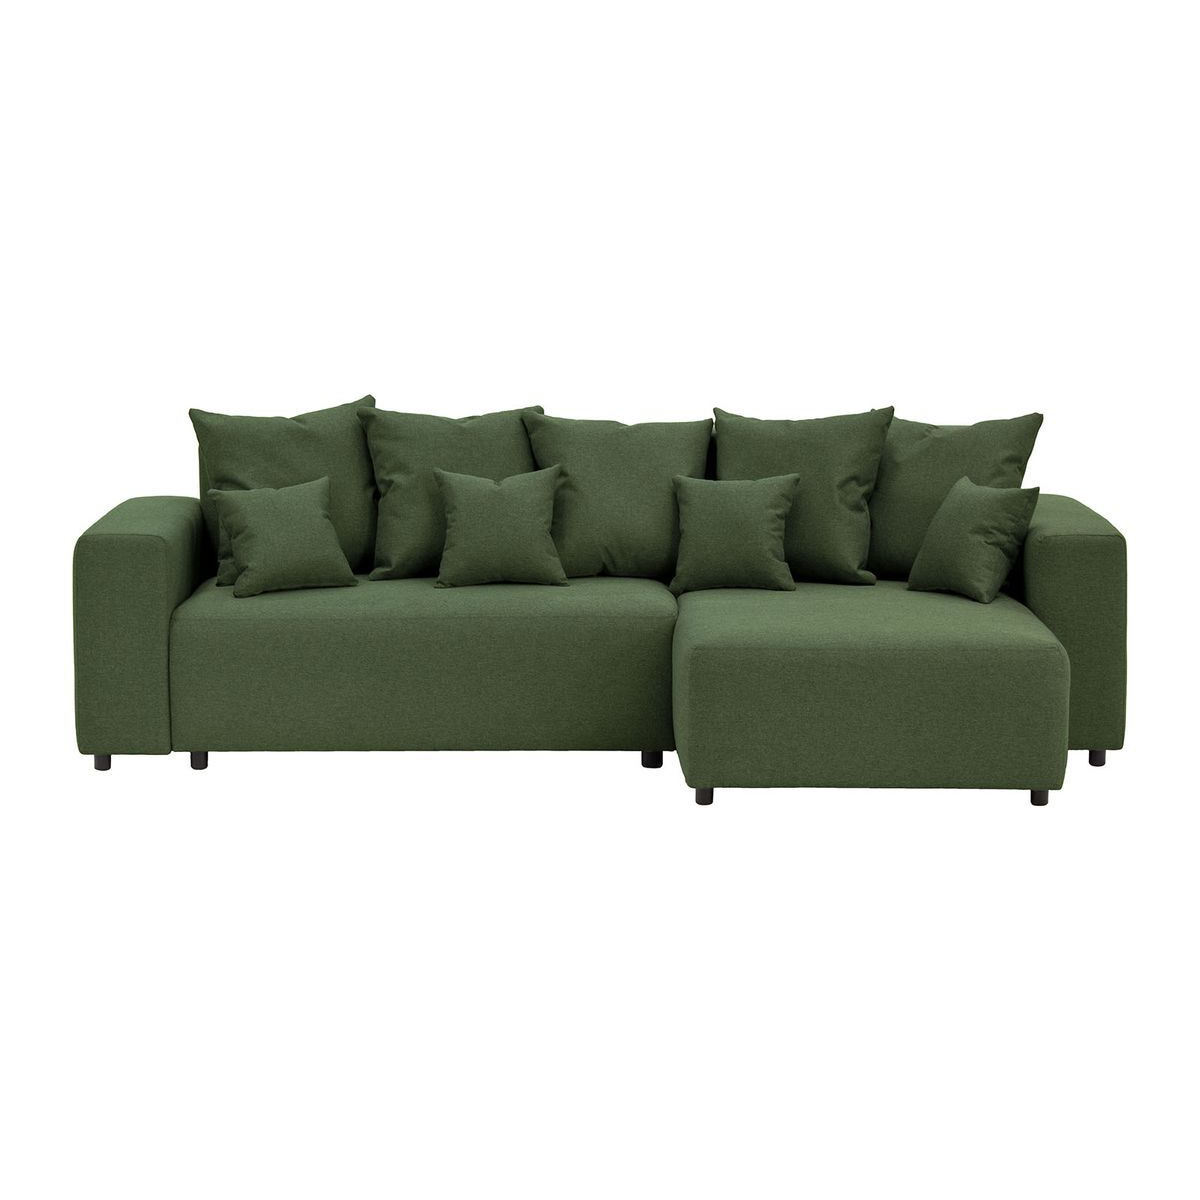 Homely Right Hand Corner Sofa Bed, dark green - image 1